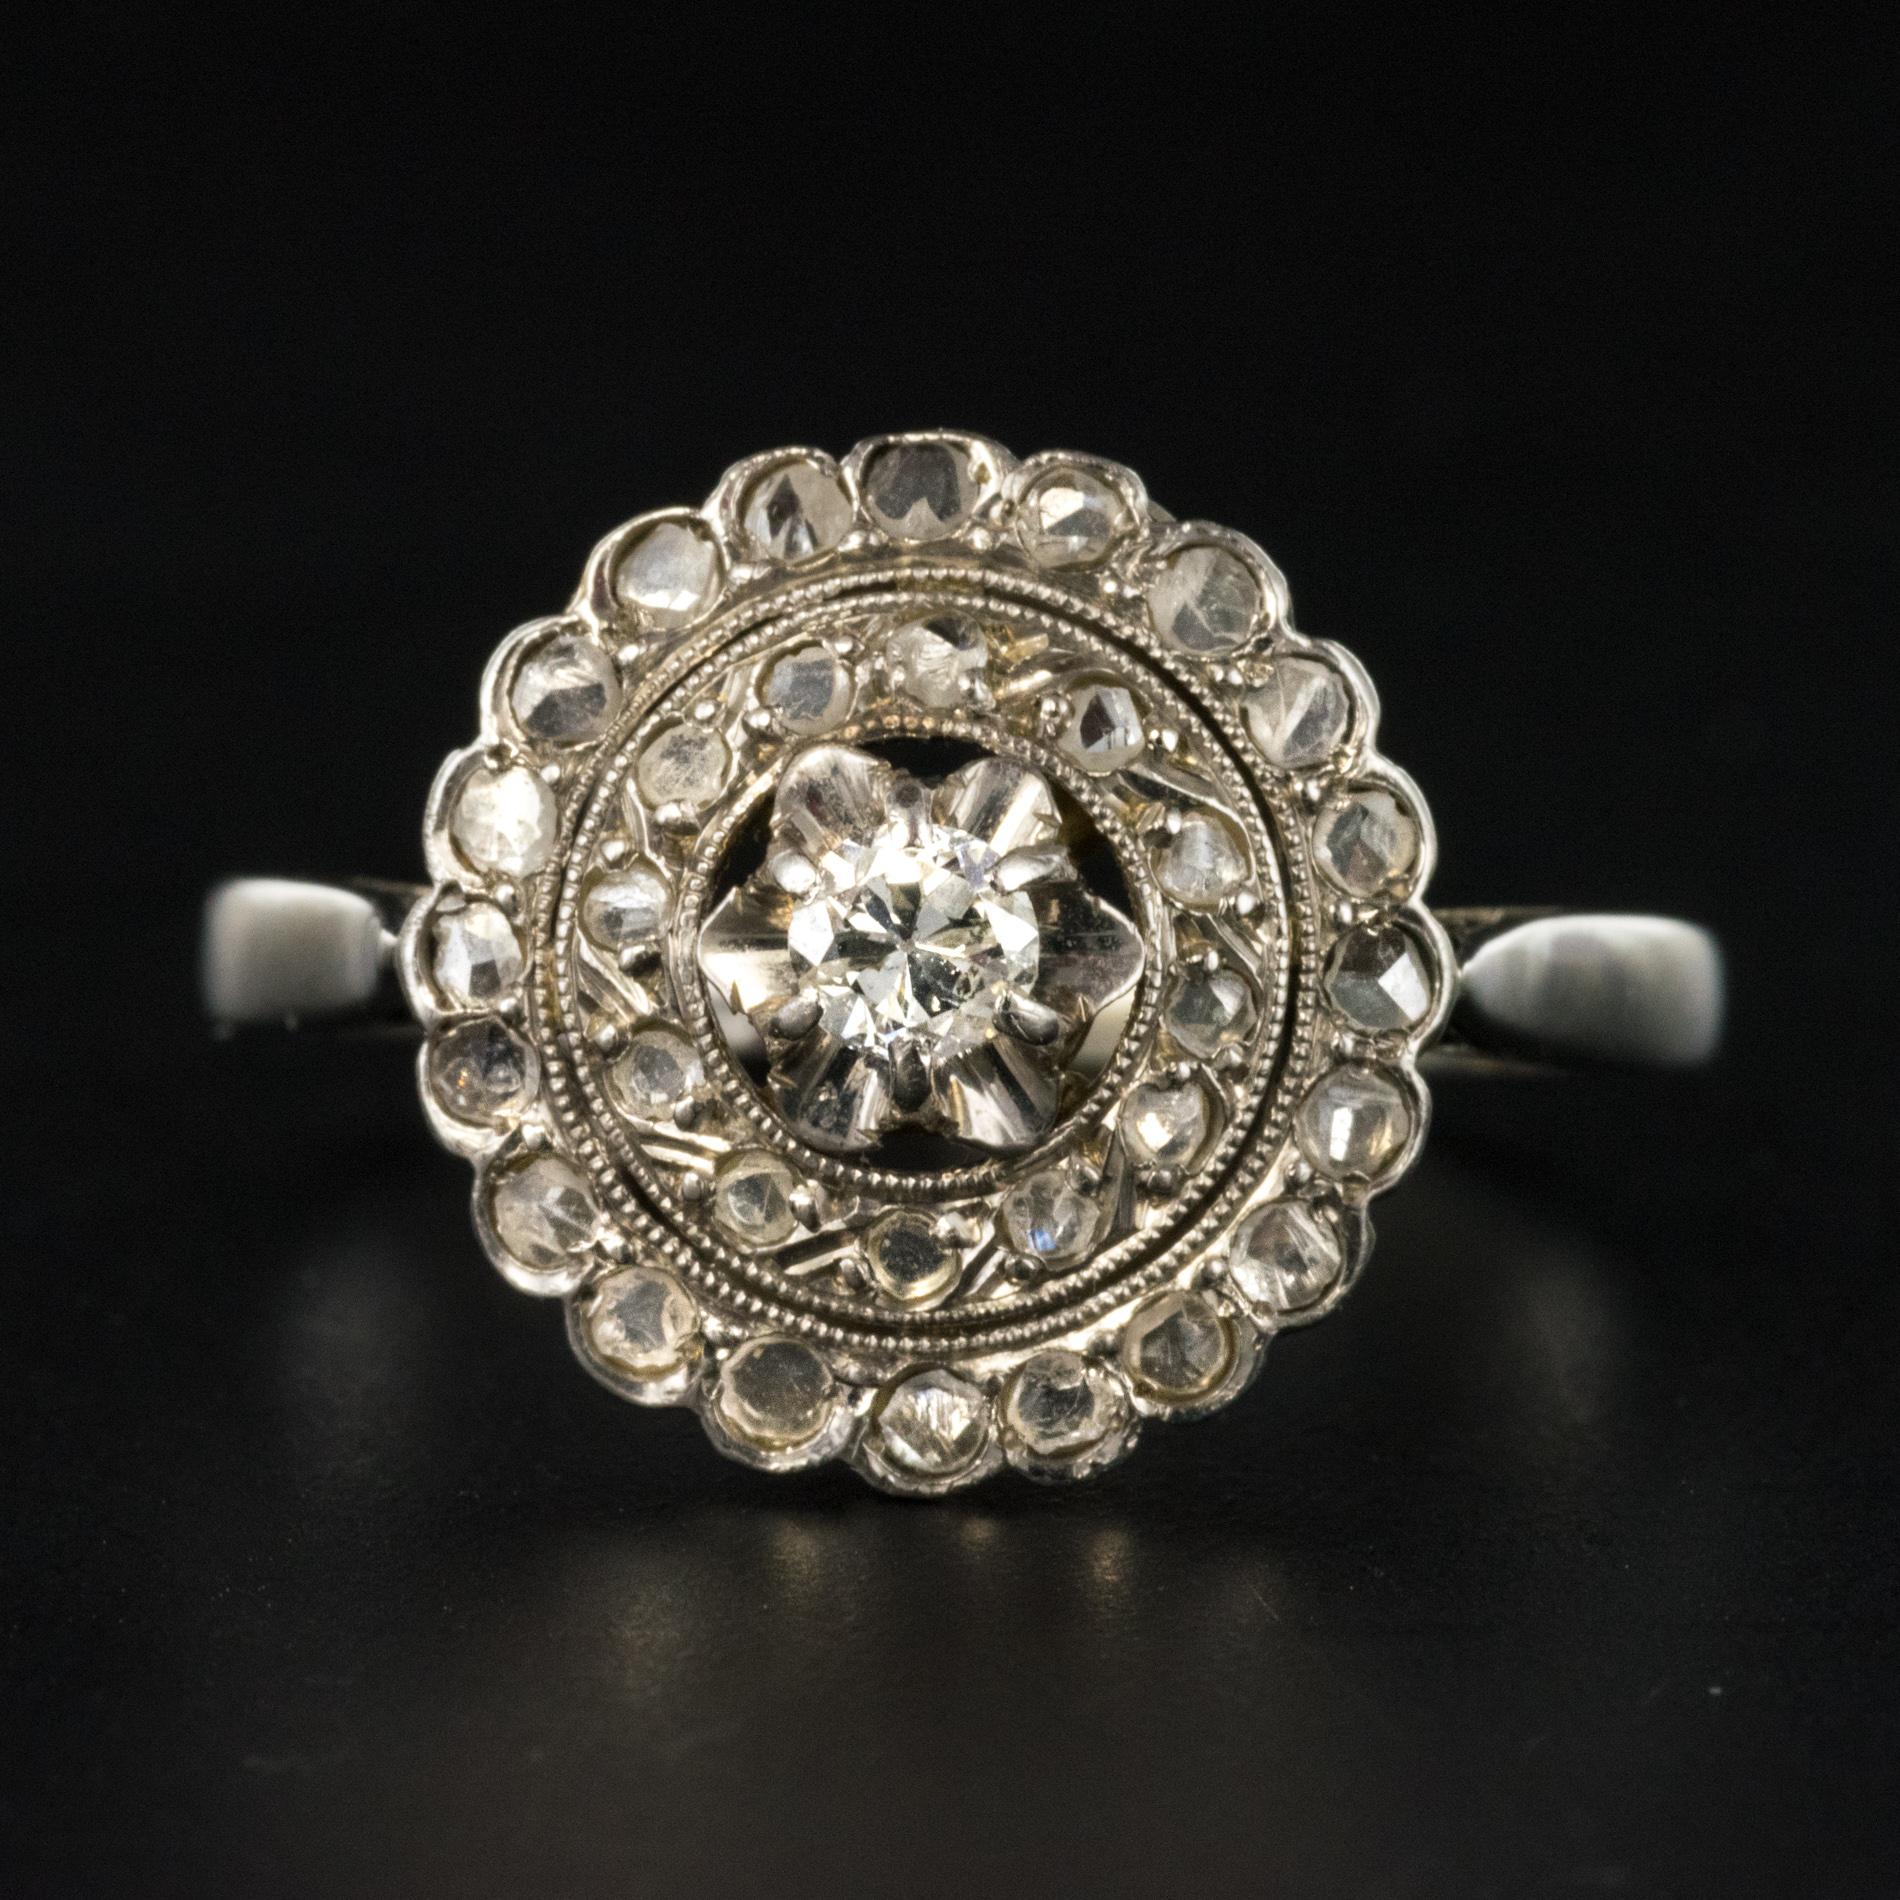 Ring in 18 karats white gold, eagle's head hallmark.
Round shape, this lovely antique ring is set with claws in the center of a double row of rose- cut diamonds of a brilliant- cut antique diamond. The basket is perforated to let light in under the